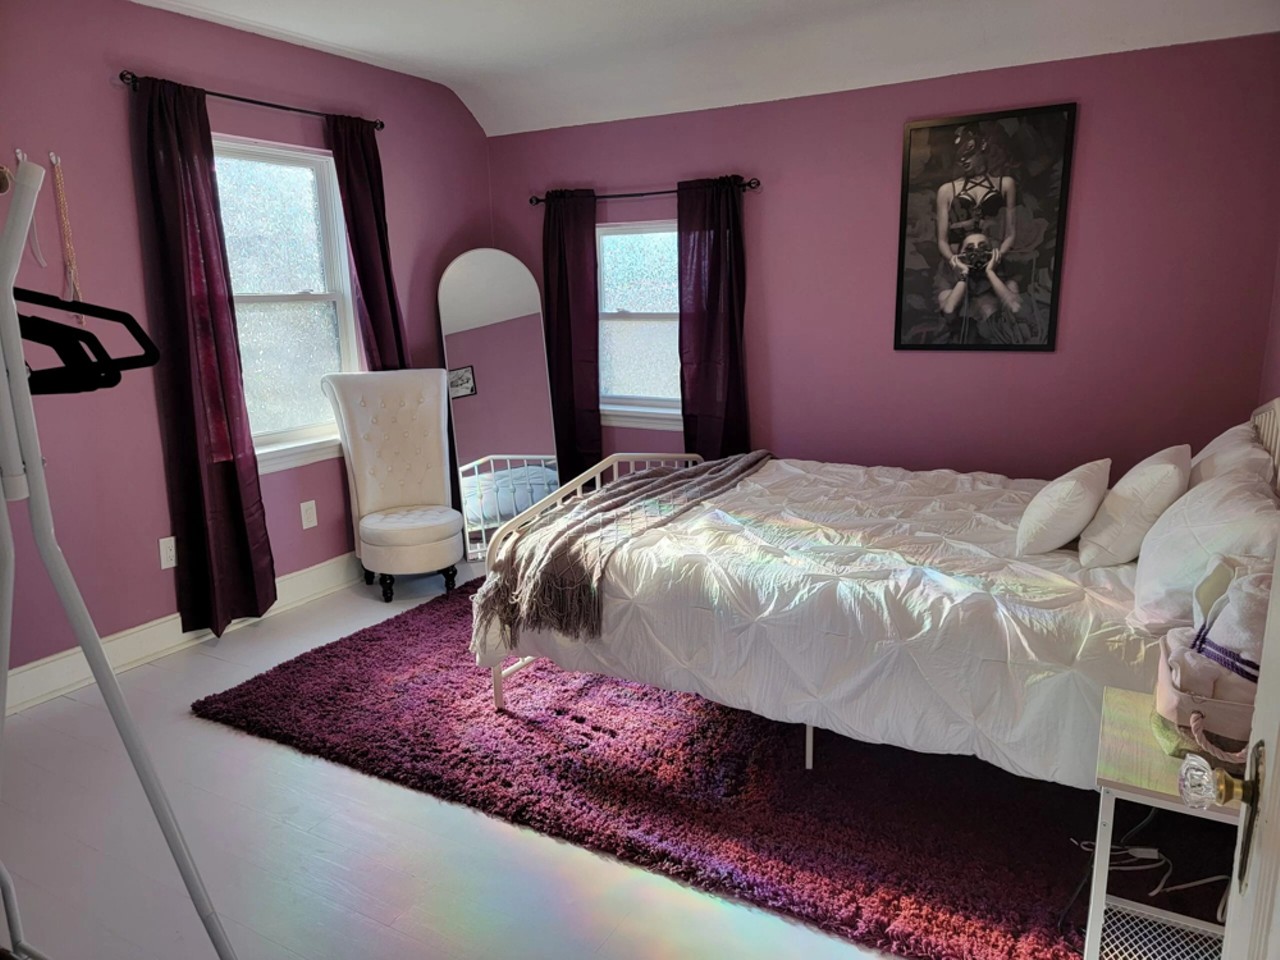 PHOTOS: How About A Bit of Afternoon Delight? Rent This "Spicy" B&B In Cincinnati